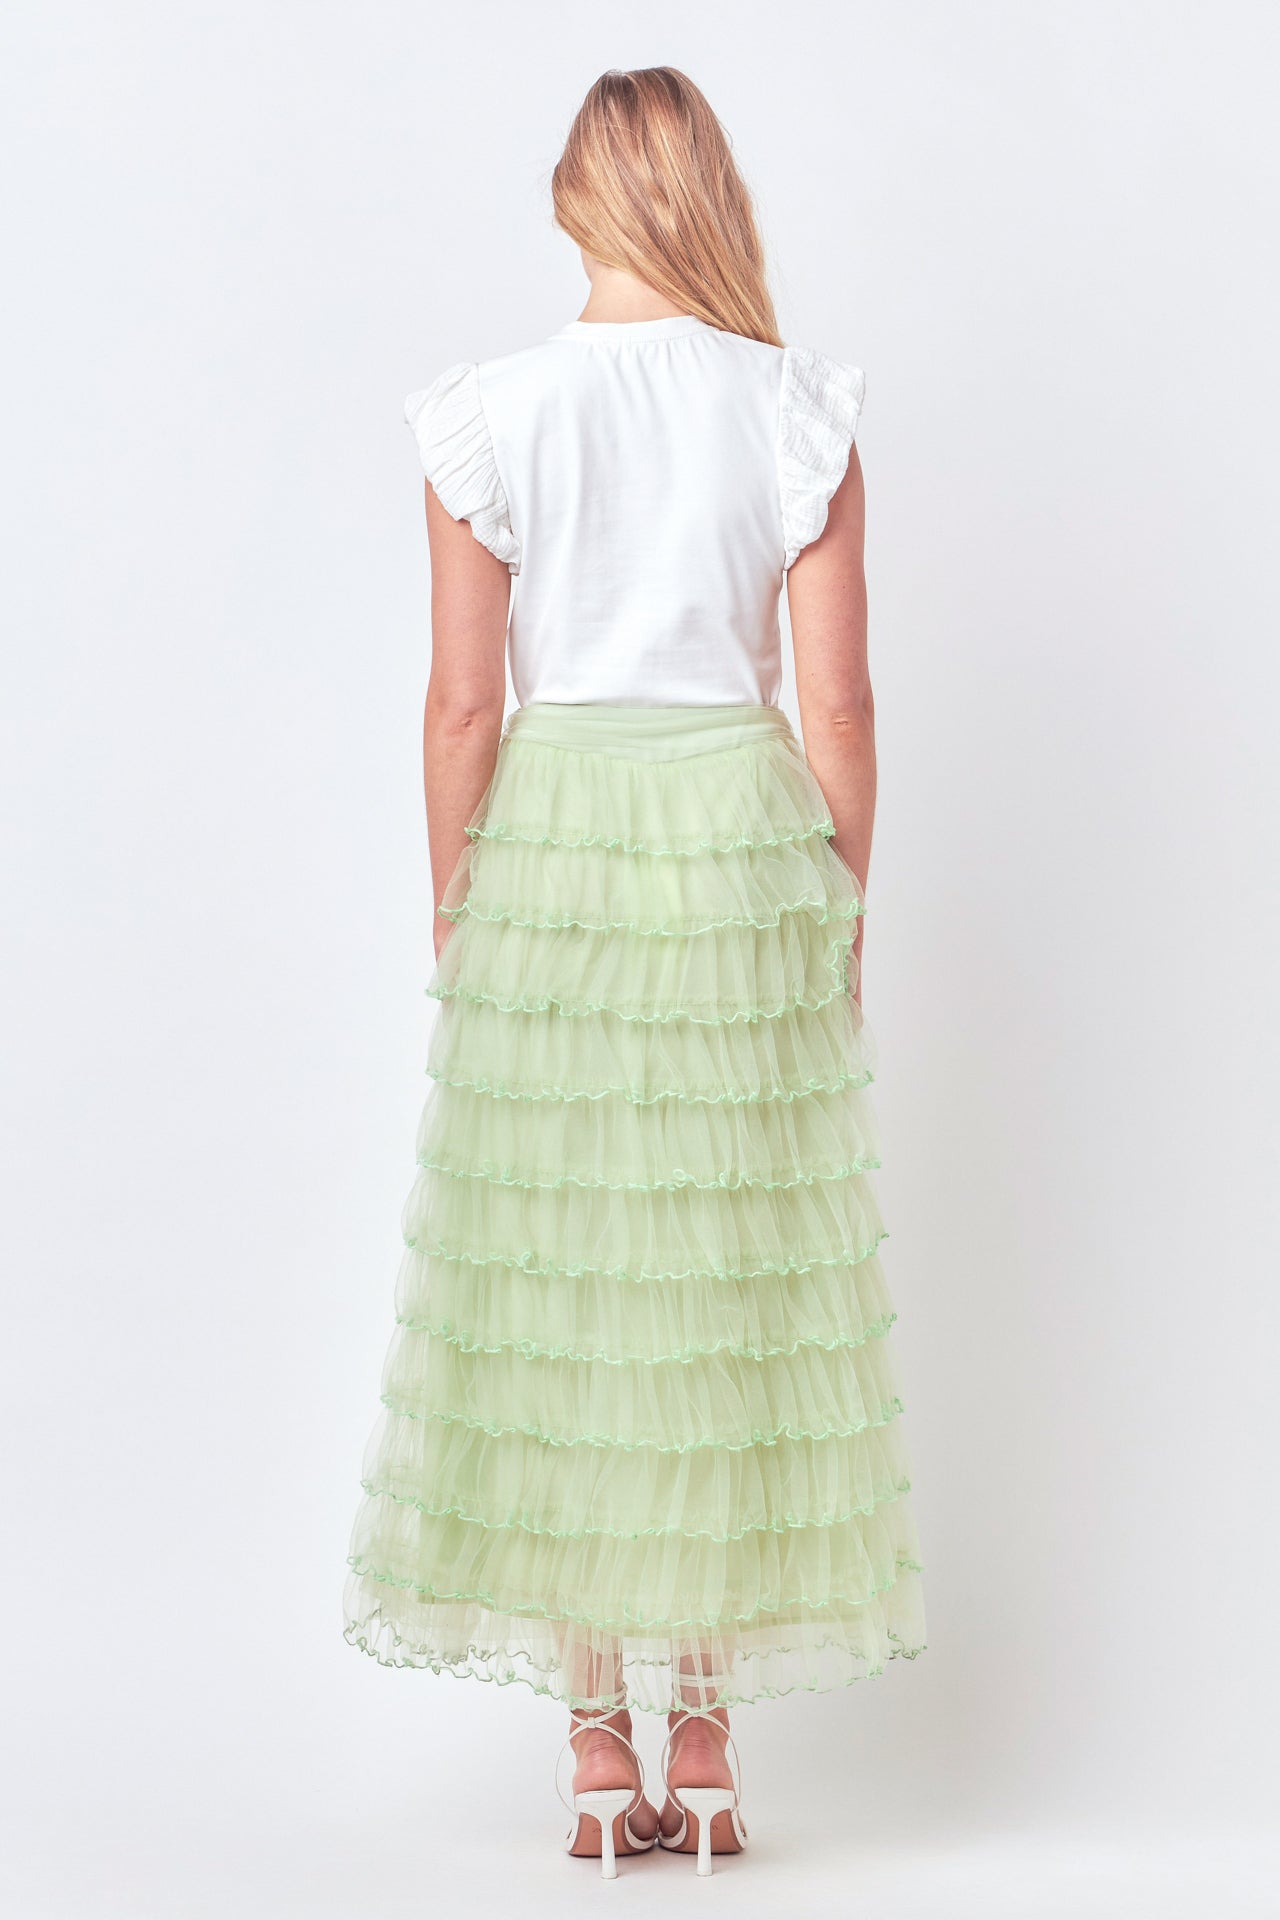 FREE THE ROSES - Layered Tulle Midi Skirt - SKIRTS available at Objectrare